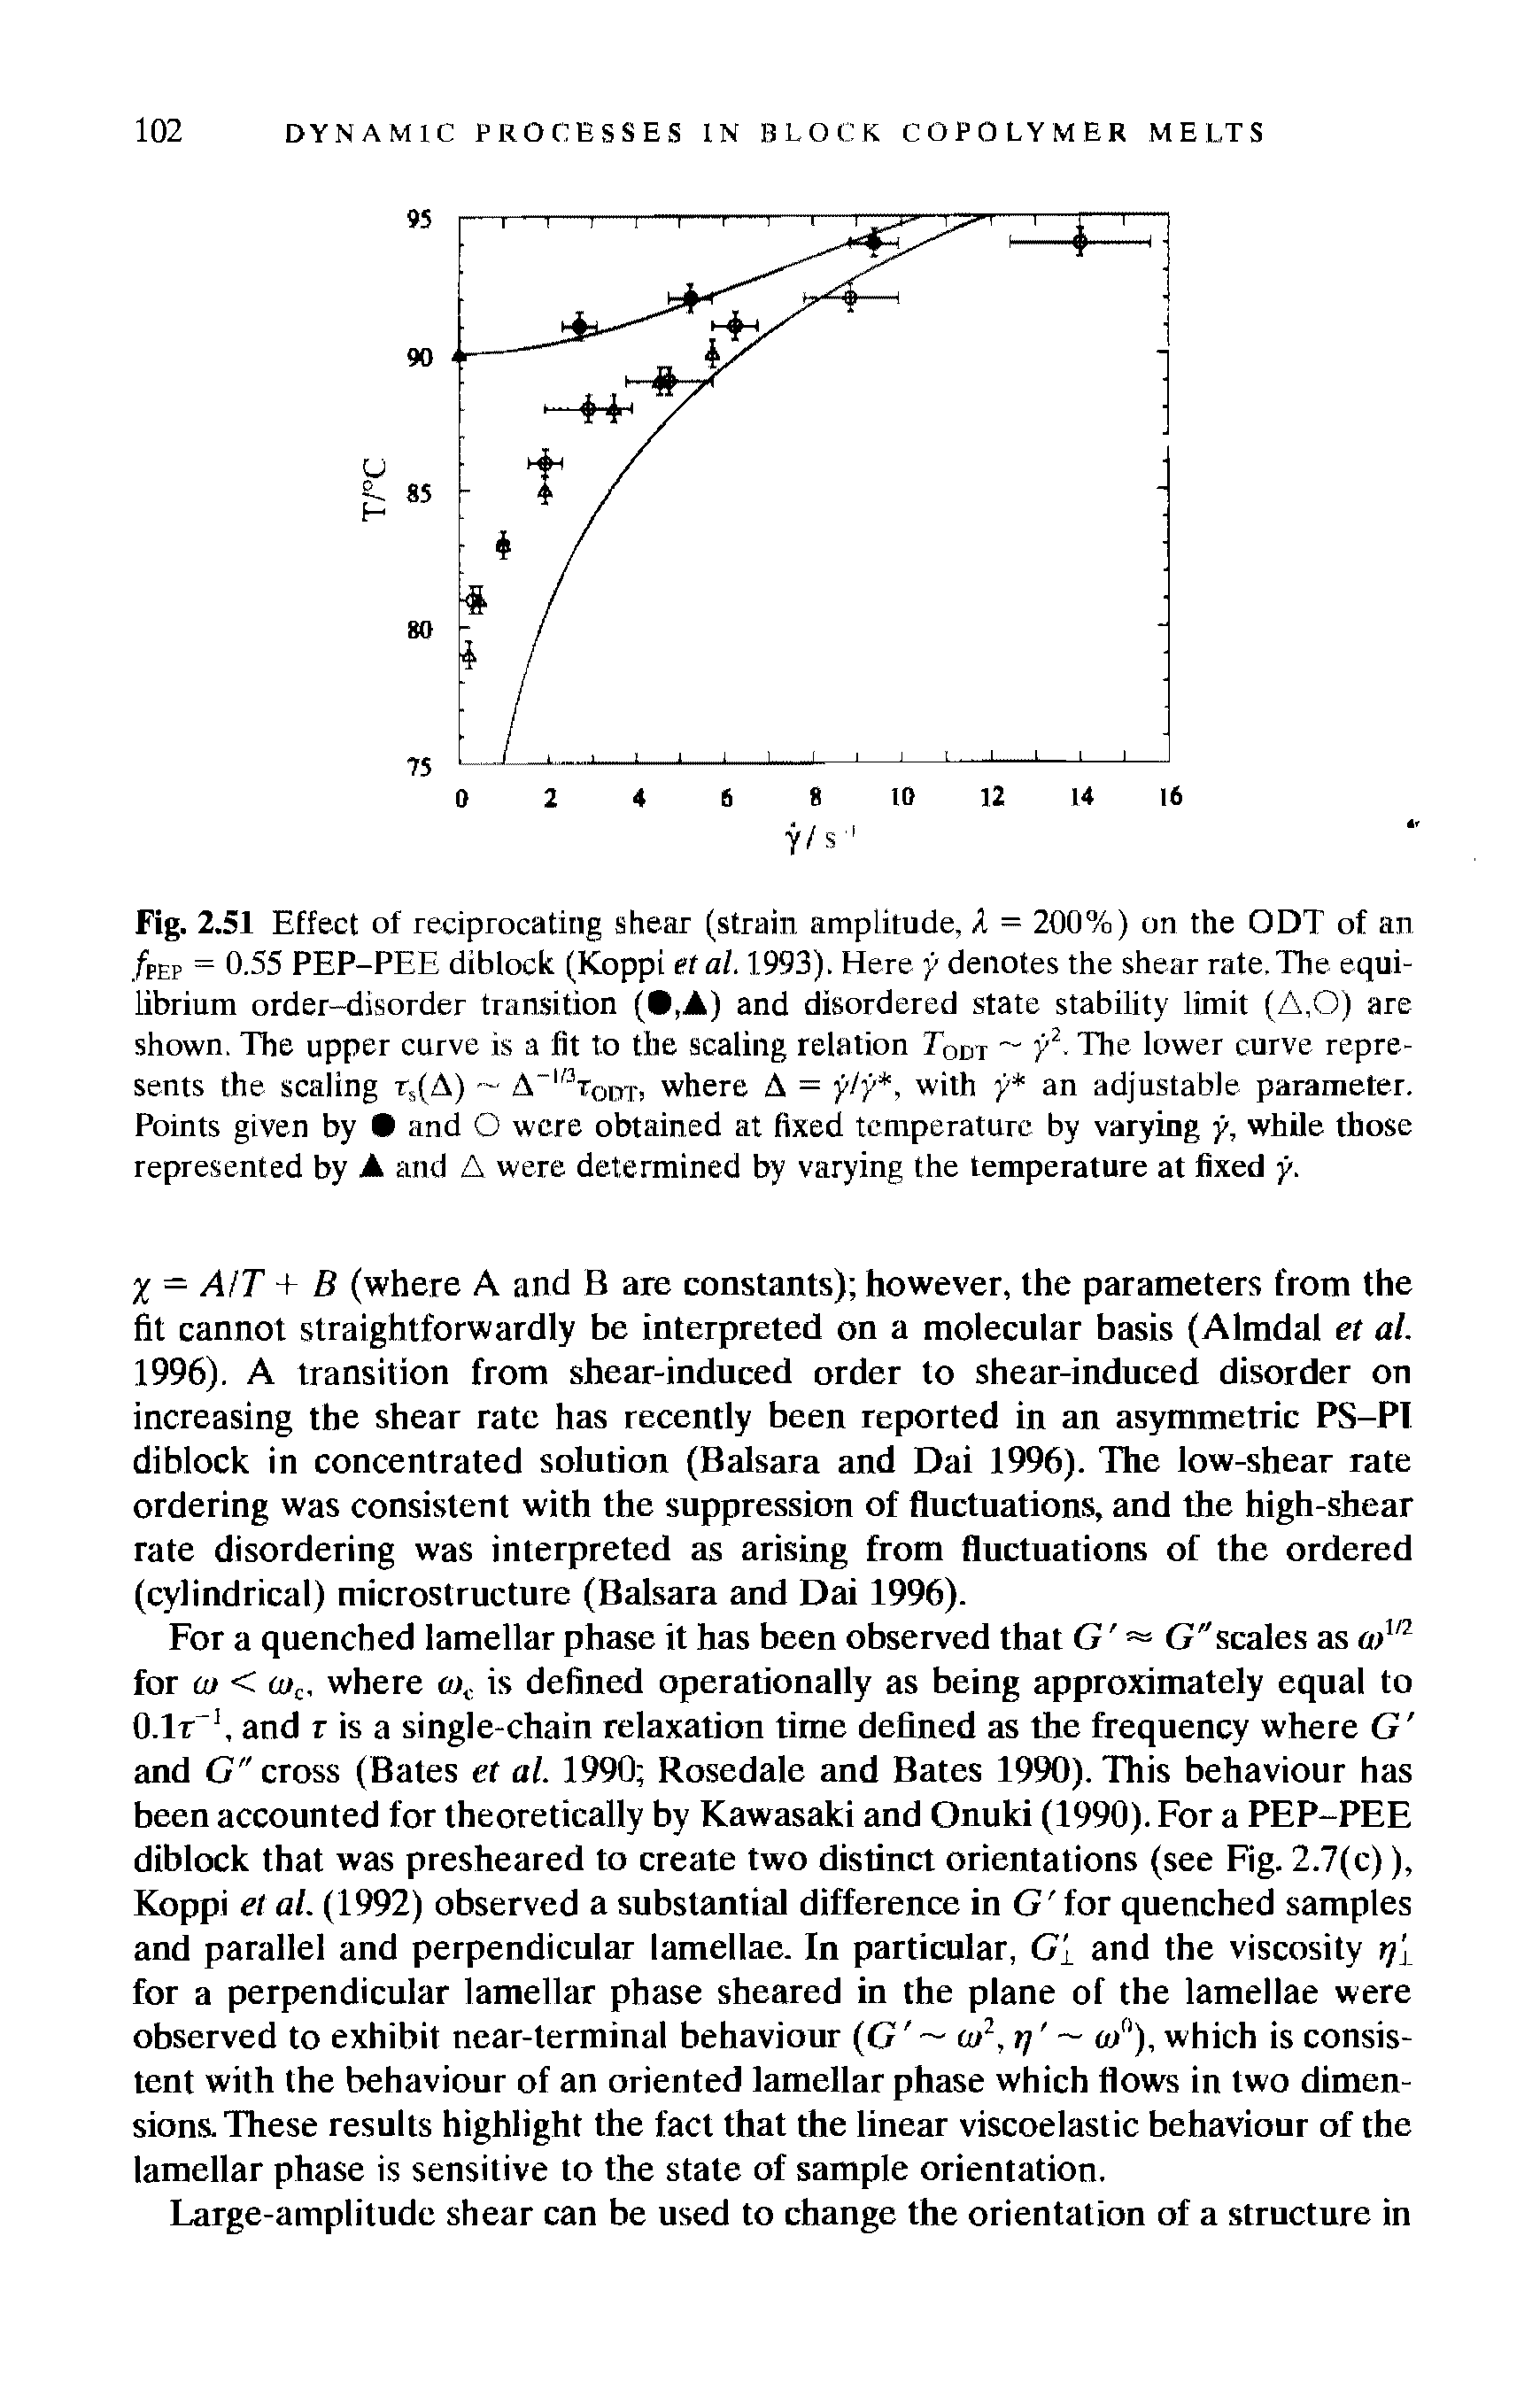 Fig. 2.51 Effect of reciprocating shear (strain amplitude, k = 200%) on the ODT of an /pep = 0.55 PEP-PEE diblock (Koppi etal. 1993). Here y denotes the shear rate.The equilibrium order-disorder transition (, A) and disordered state stability limit (A.O) are shown. The upper curve is a fit to the scaling relation Tom y2- The lower curve represents the. scaling rs(A) A-i,3Todt> where A = y/y, with y an adjustable, parameter. Points given by and O were obtained at fixed temperature by varying y, while those represented by A and A were determined by varying the temperature at fixed y.